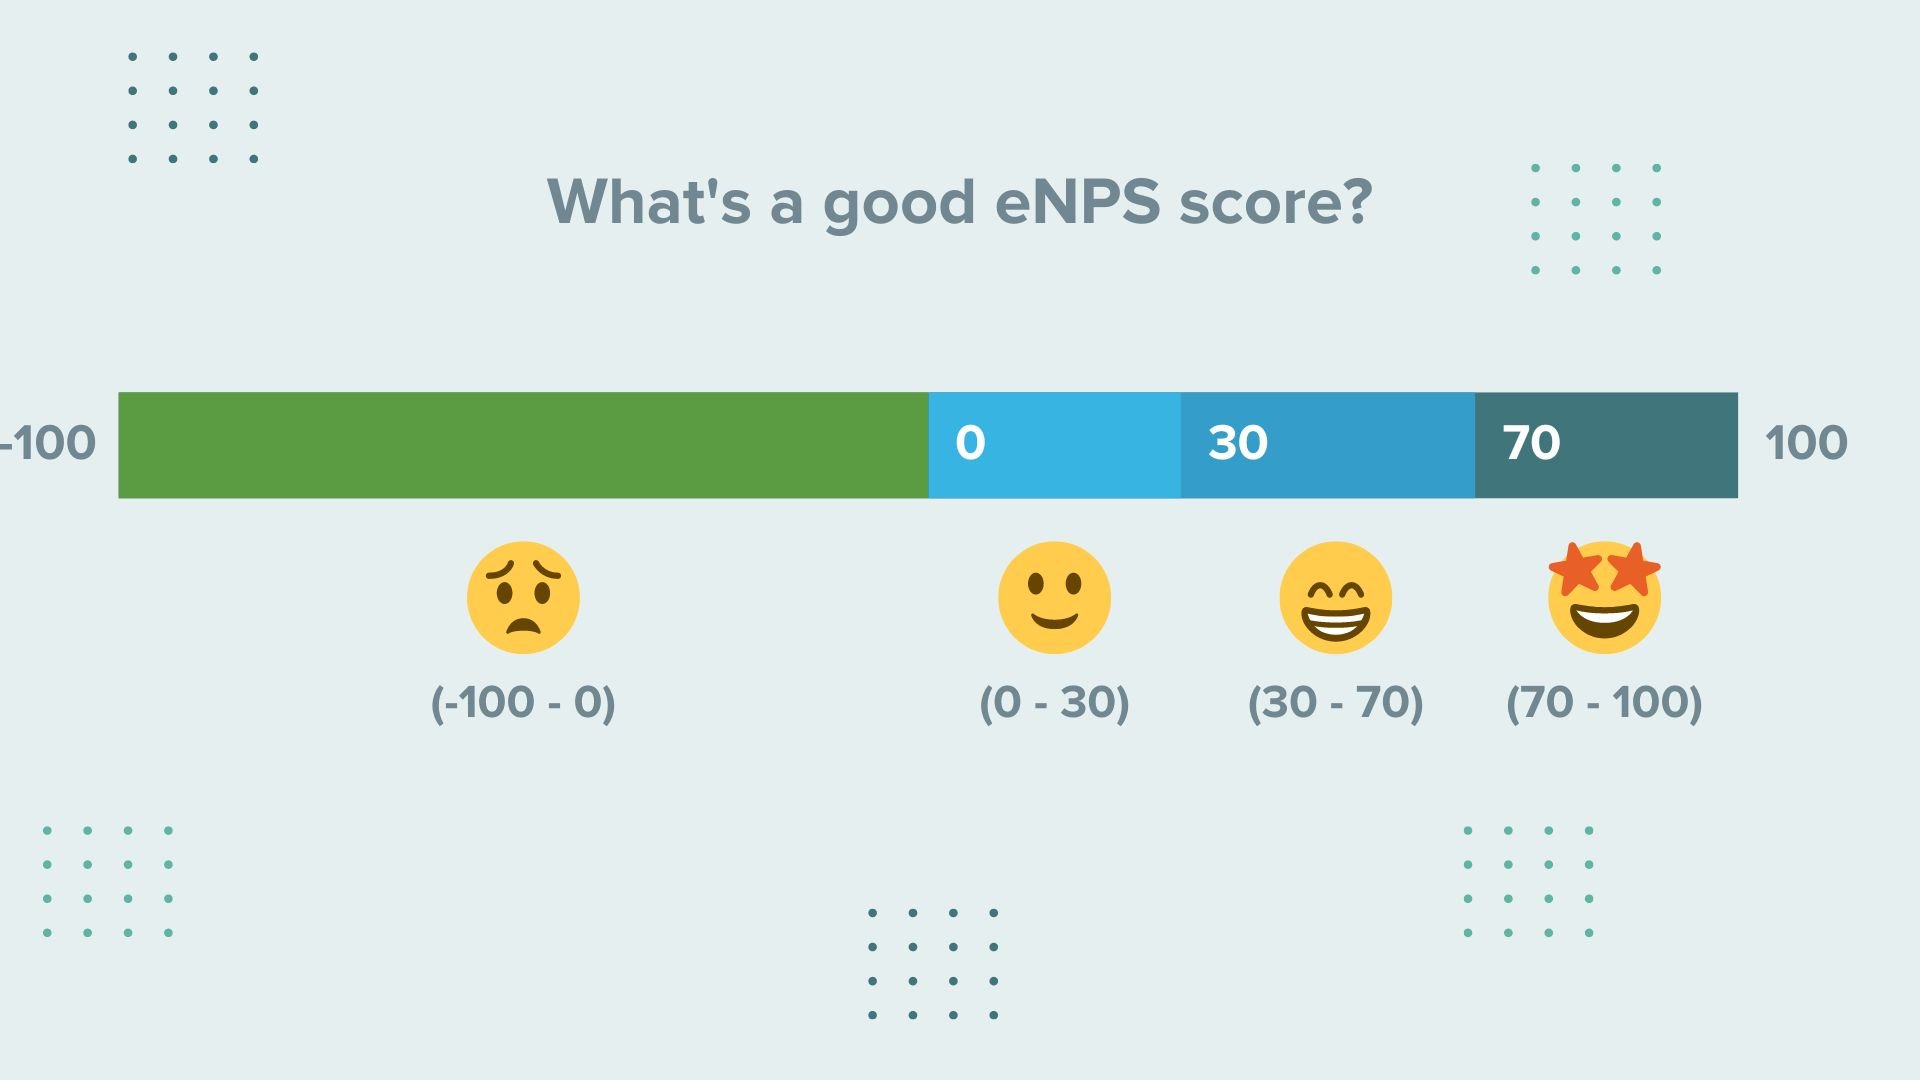 Infographic breaking down eNPS scores, with -100 - 100 needing improvement, 0 - 30 being good, 30 - 70 being great and 70 - 100 being excellent.